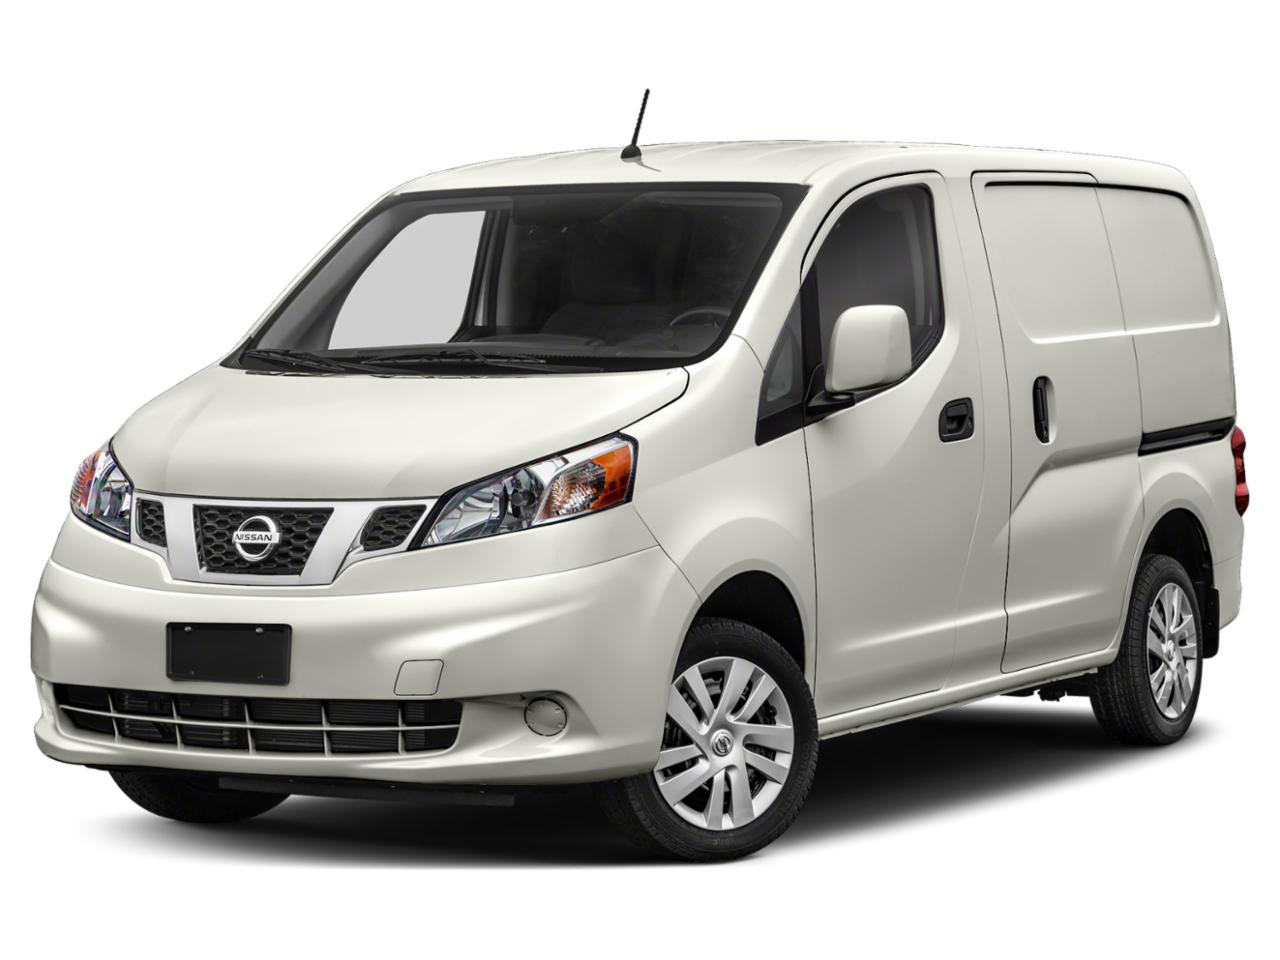 2019 Nissan NV200 Compact Cargo Vehicle Photo in SELMA, TX 78154-1460